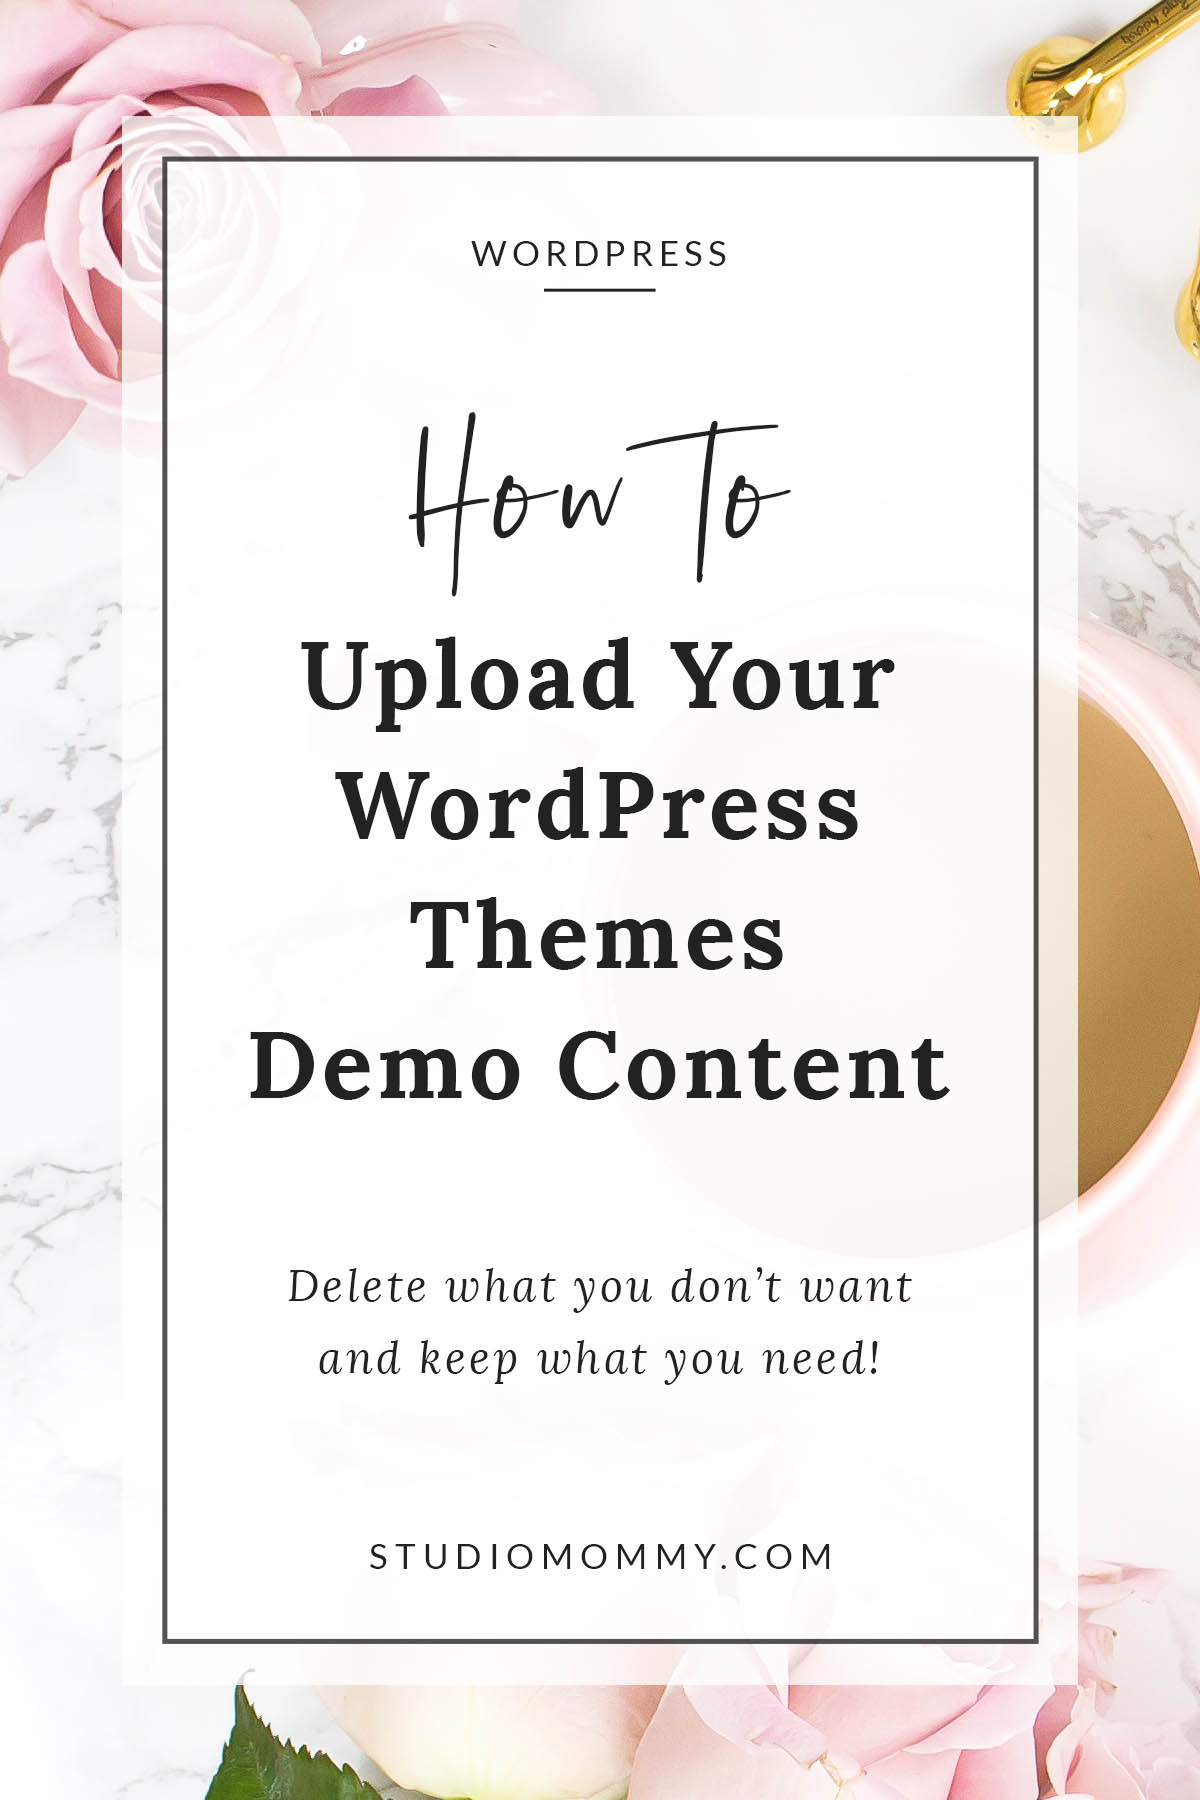 If you are starting a brand new site for the first time, your site will look nothing like the demo site. Uploading your WordPress theme's demo content is a great way to get started. This will give you a starting point. You will be able to delete what you don't want and keep what you need. #wordpress #blog #wordpressblog #wordpresstheme #howto #demo #democontent